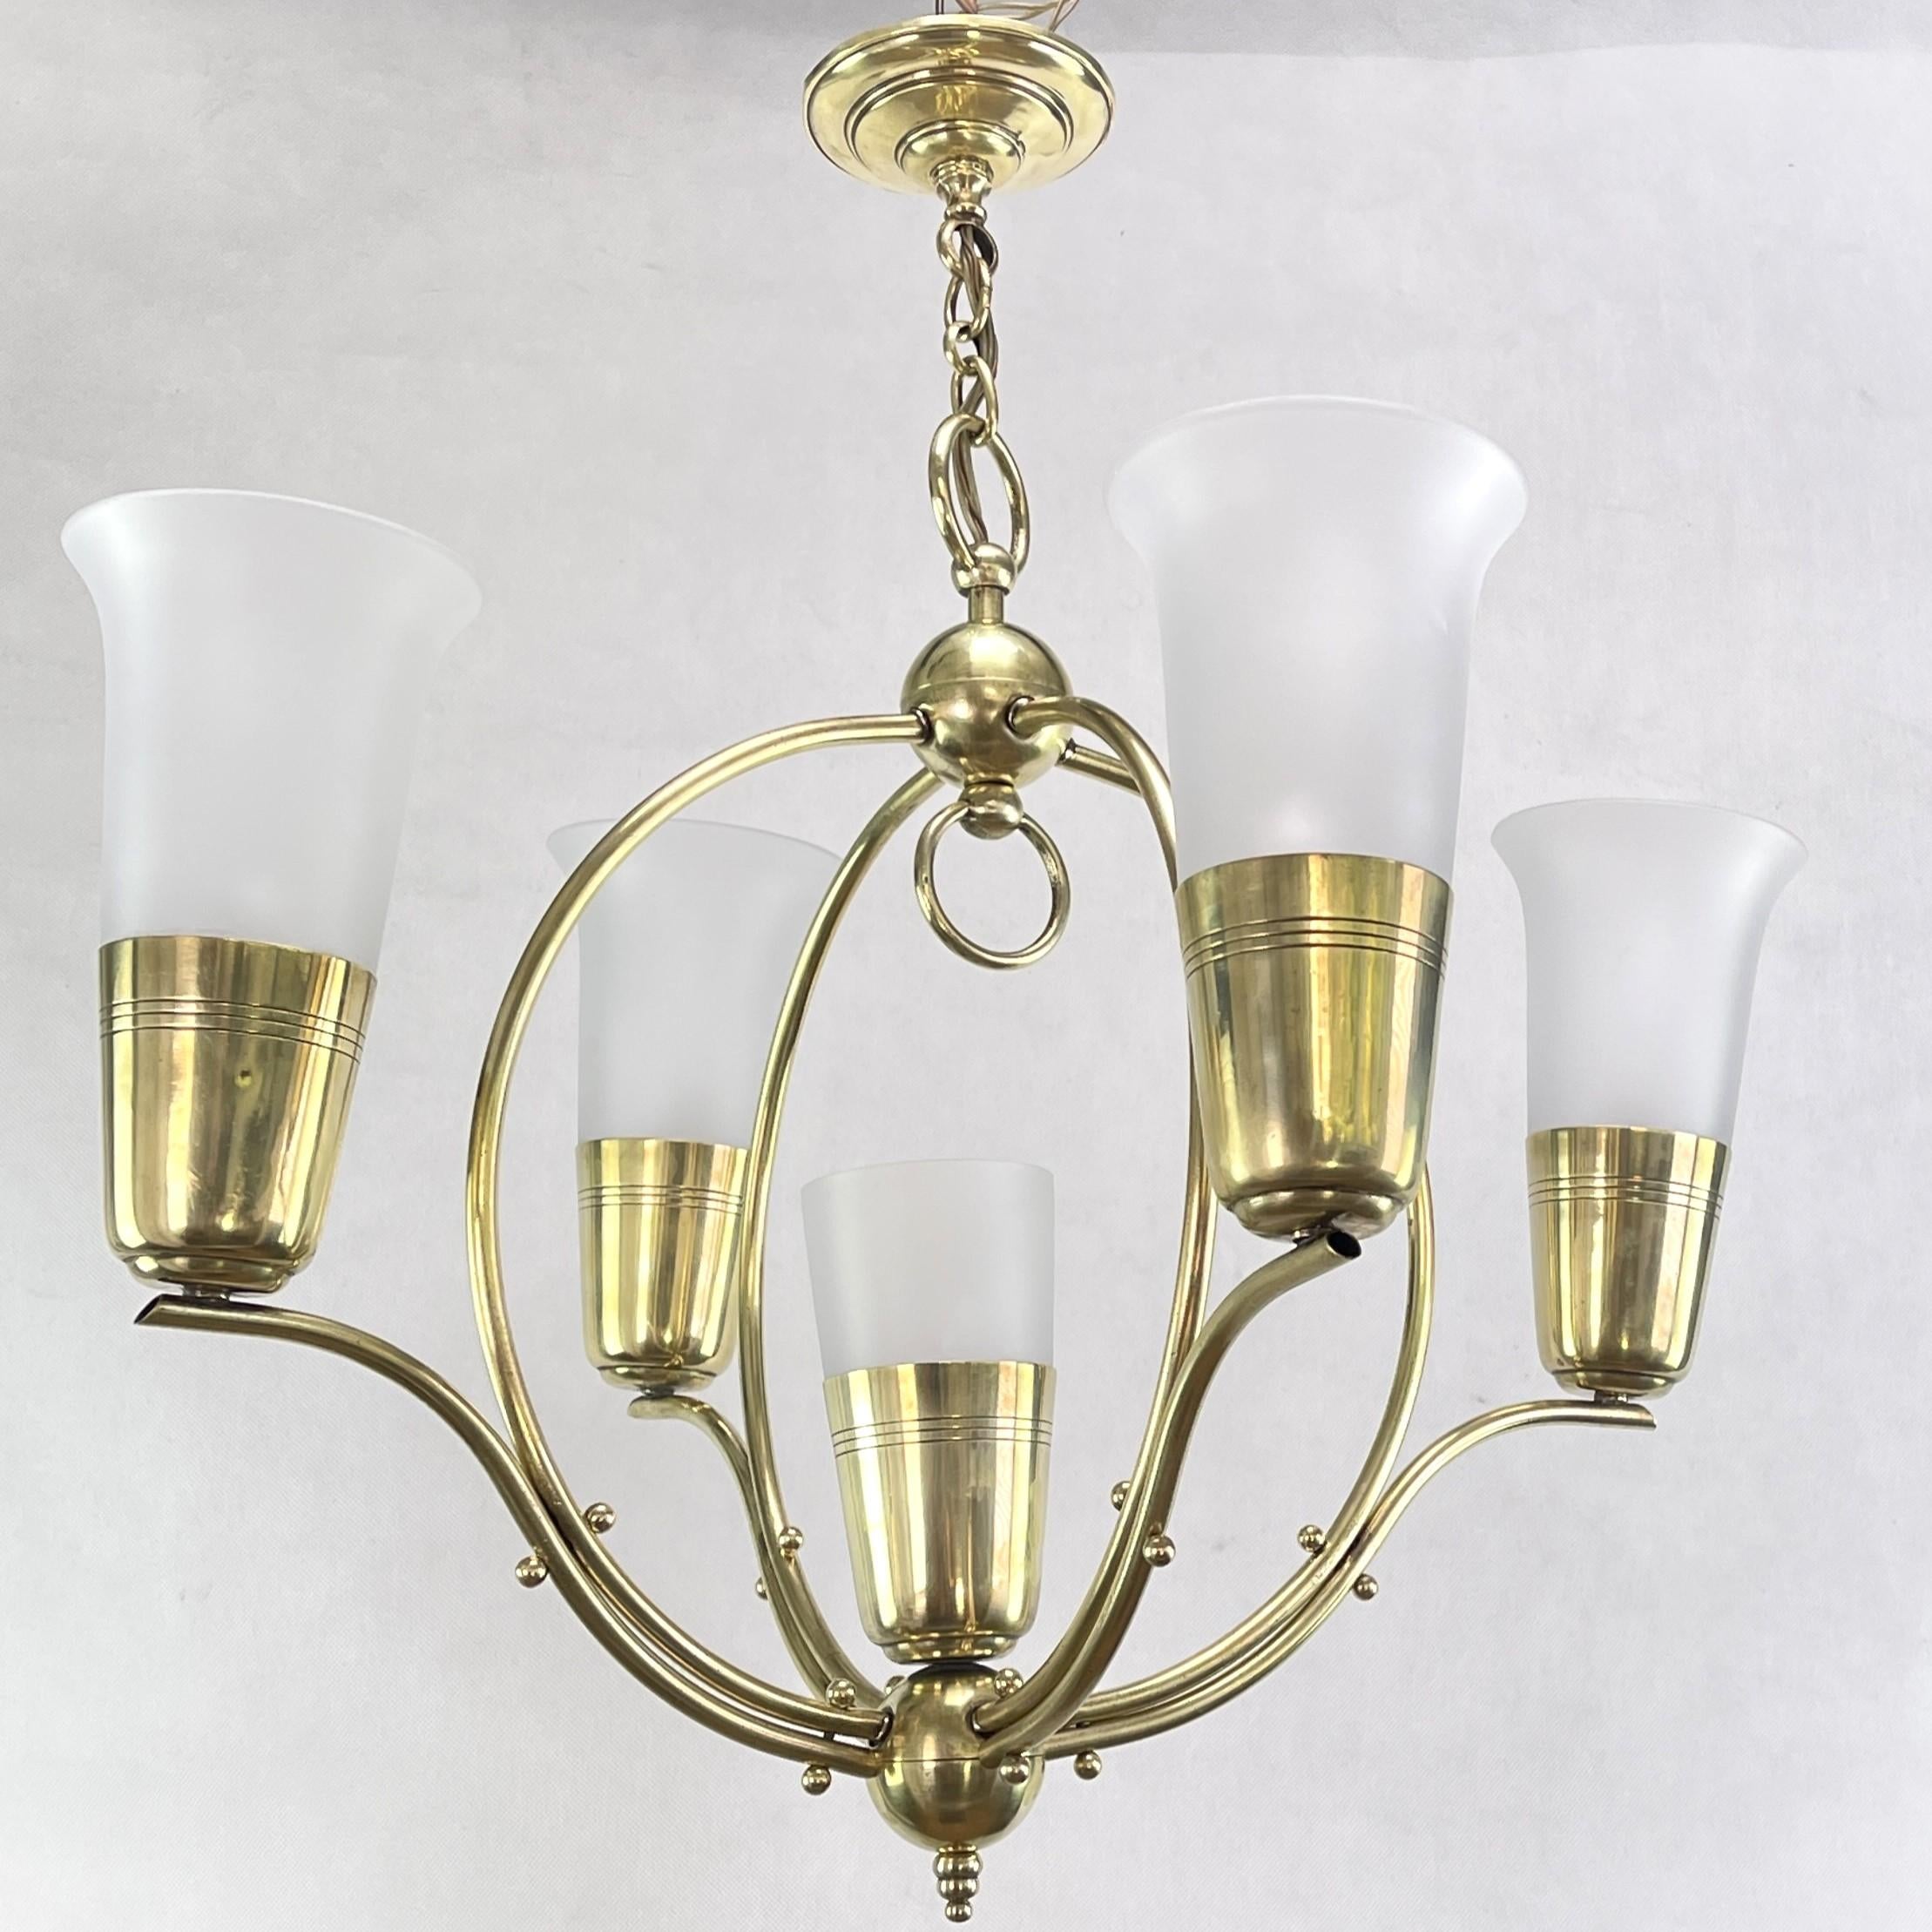 French Art Deco Ceiling Lamp with Large Glass Tulips, 1930s For Sale